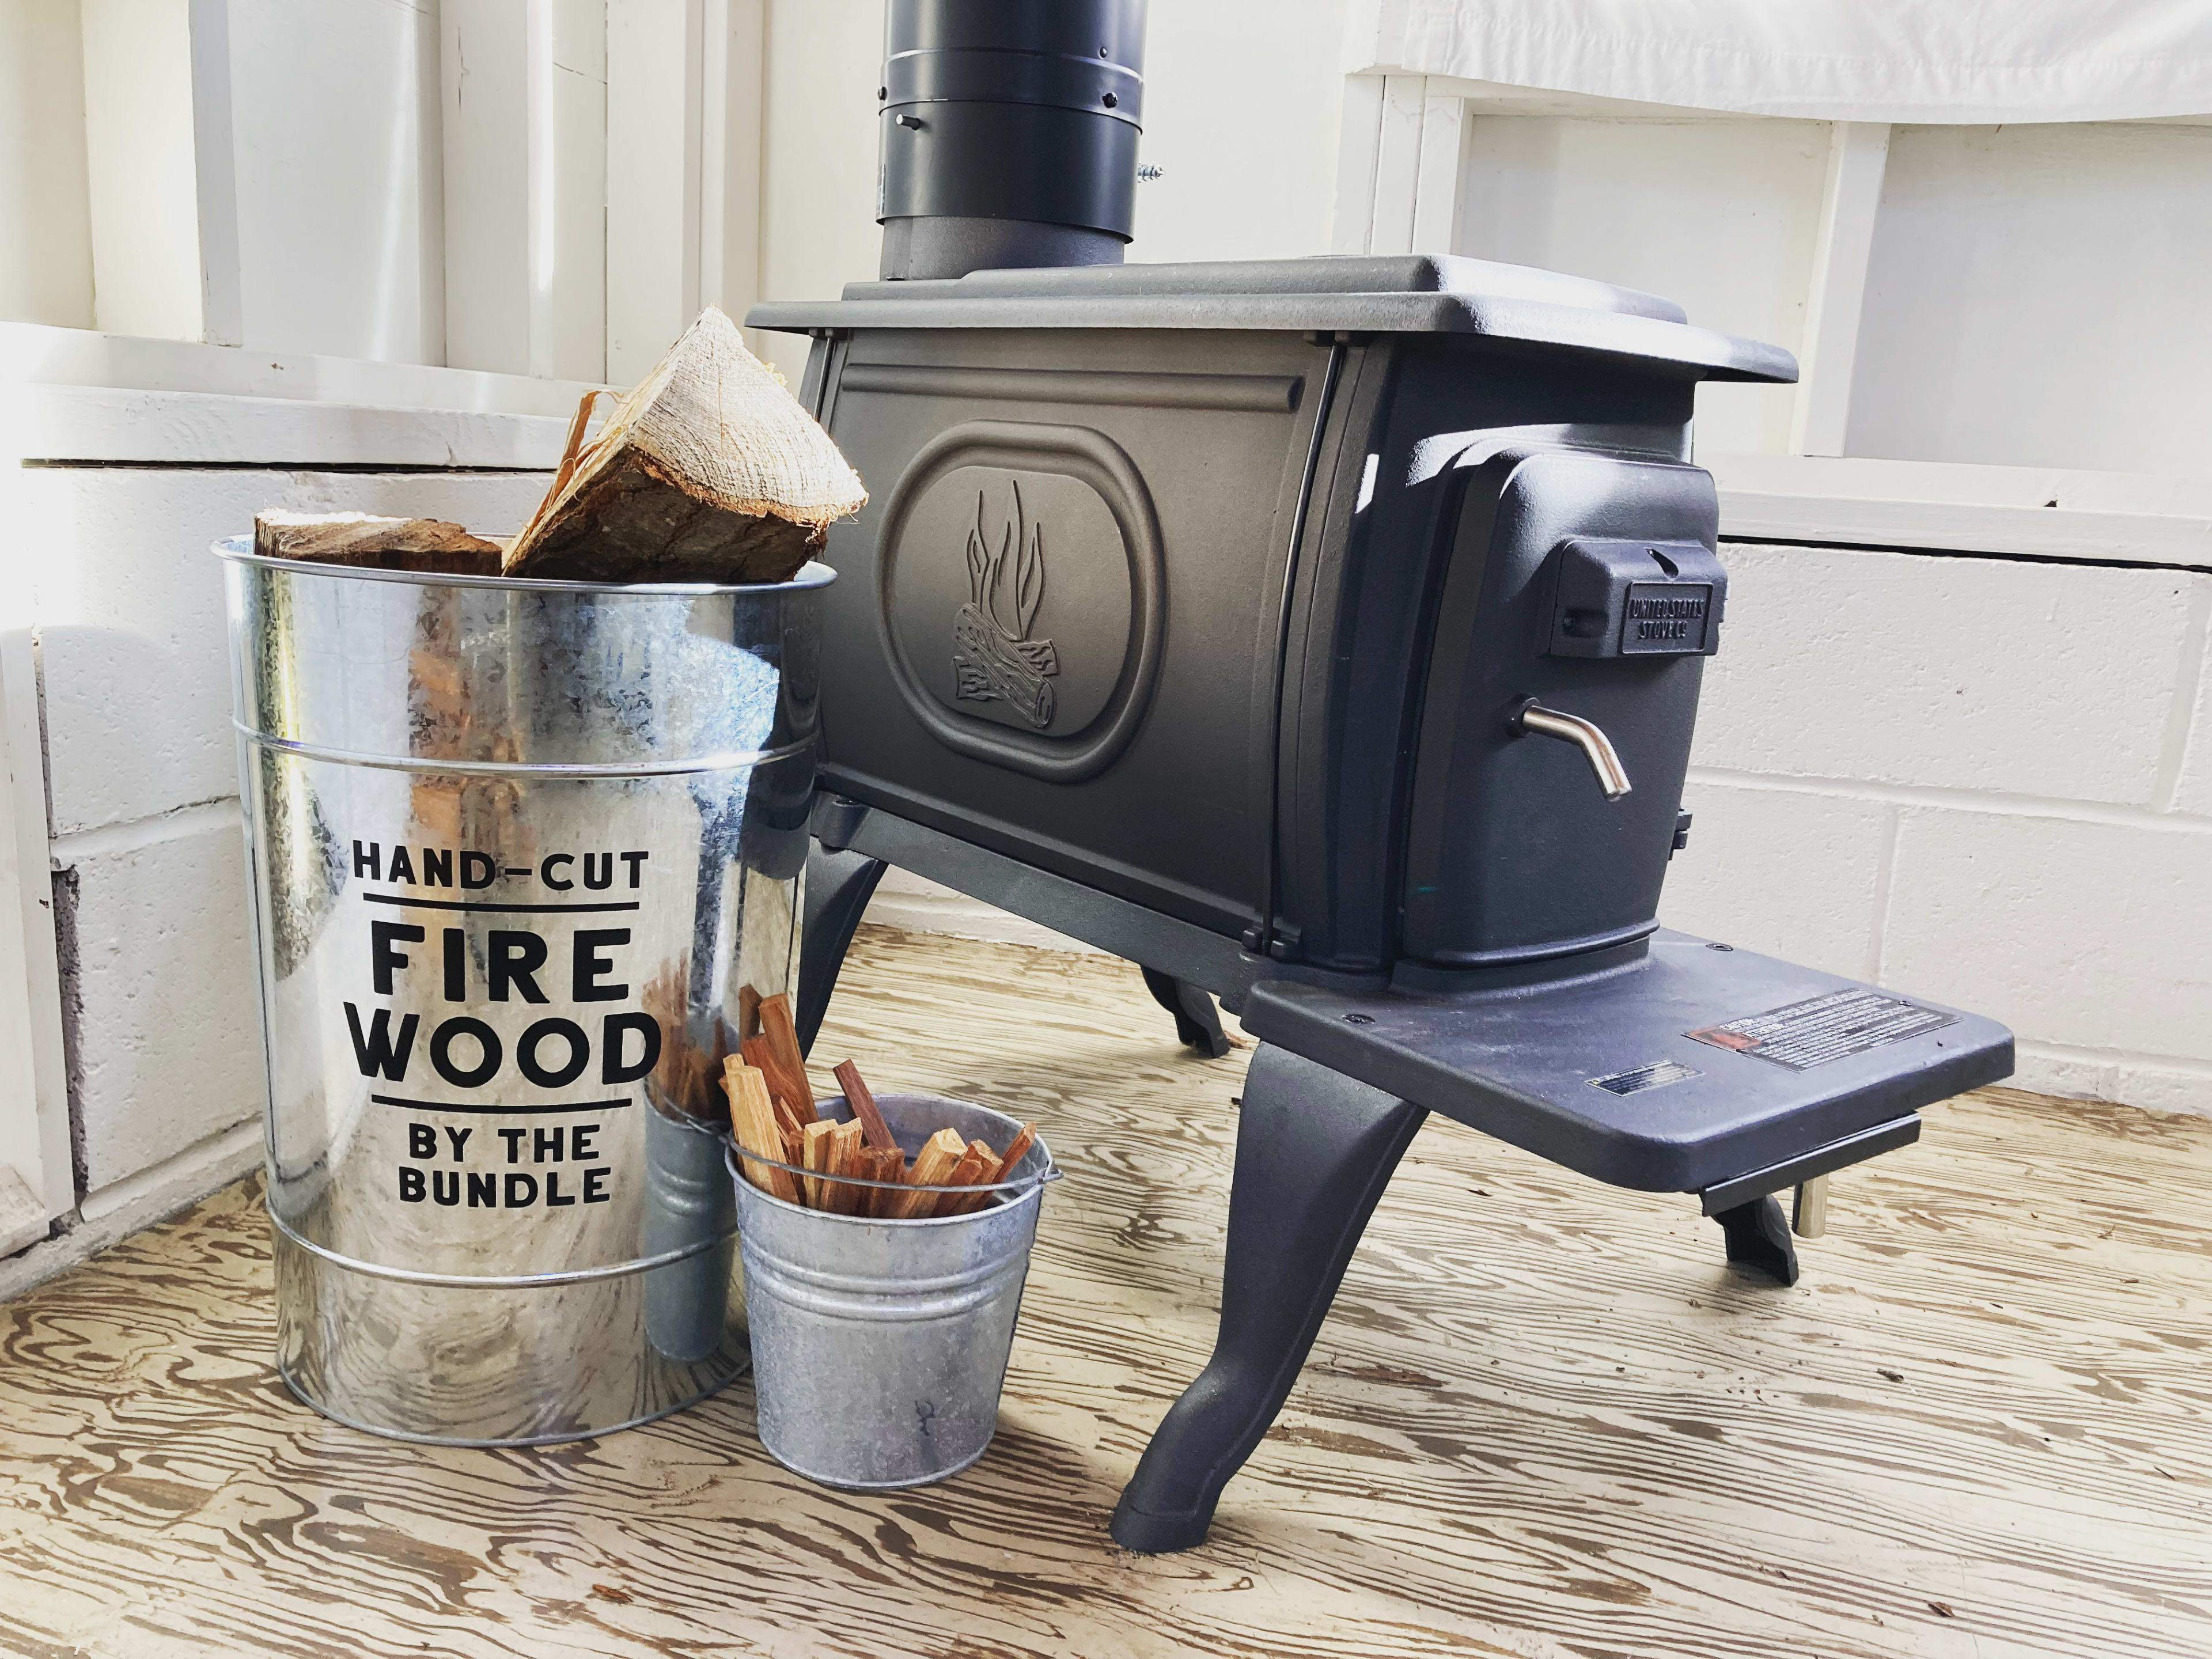 New Addition: Woodstove to keep you warm and cozy inside even when the temperature drops outside. 